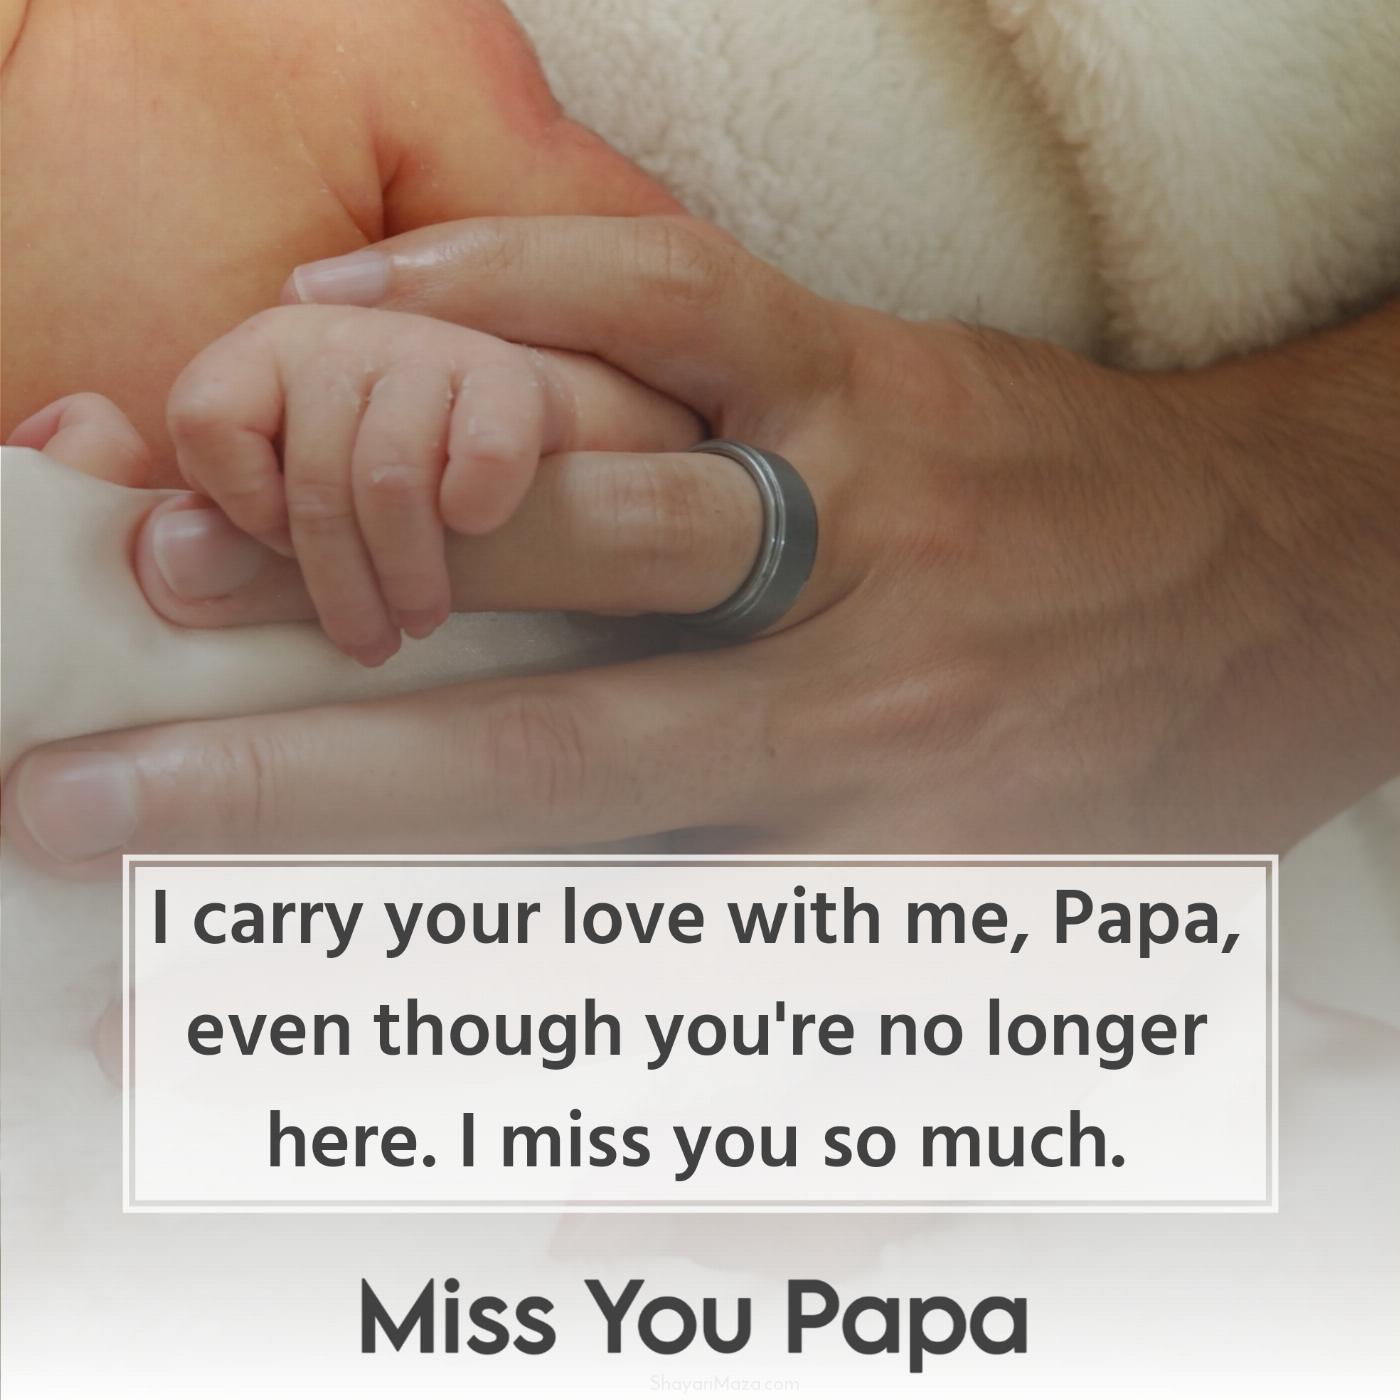 I carry your love with me Papa even though you're no longer here